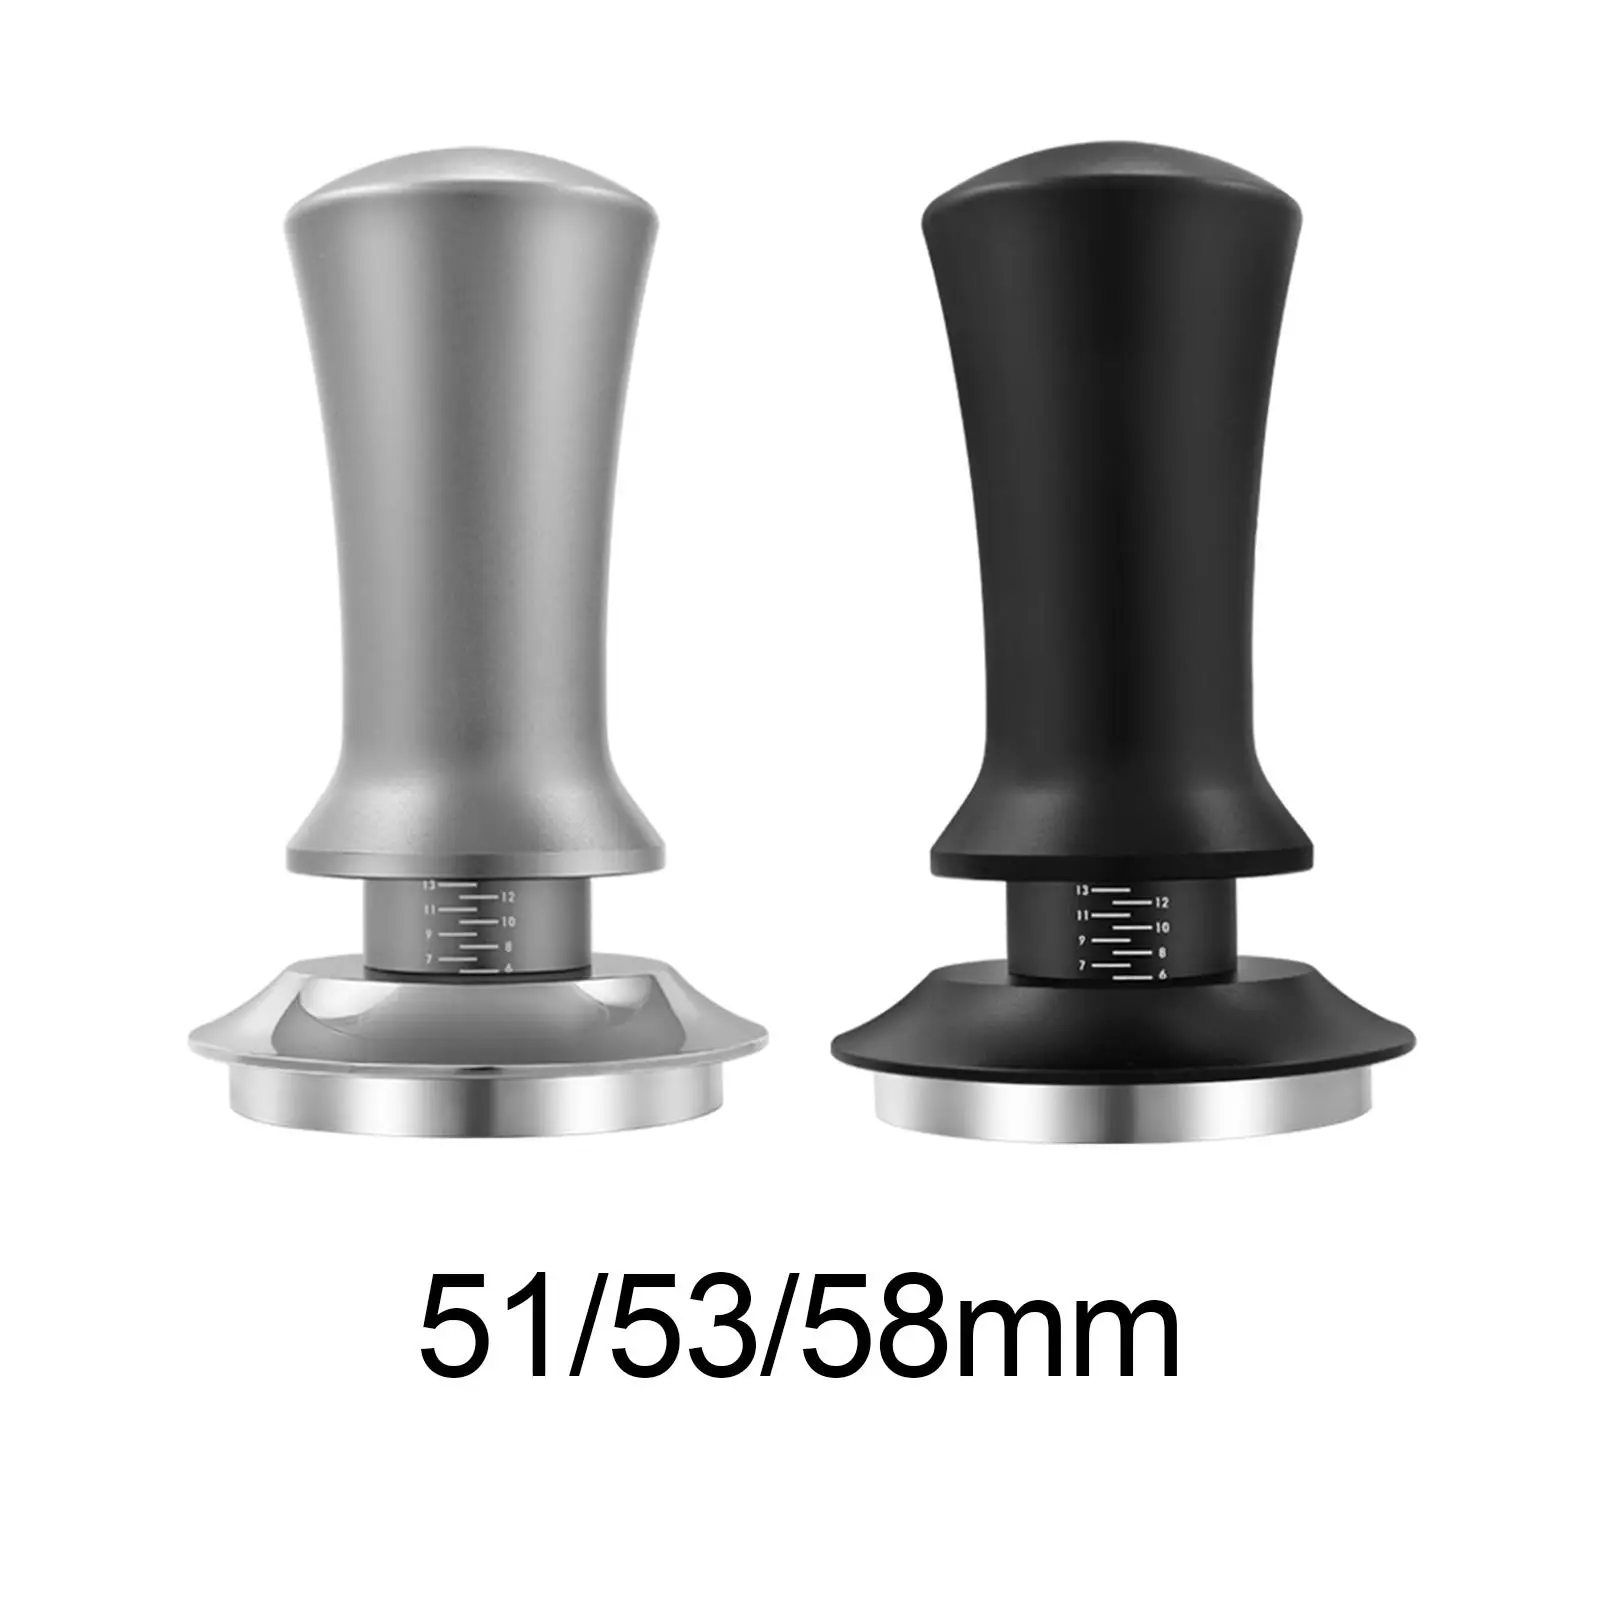 Stainless Steel Coffee Tamper Kitchen Accessories Creative with Flat base Bean Pressing Tool for Espresso Home Office